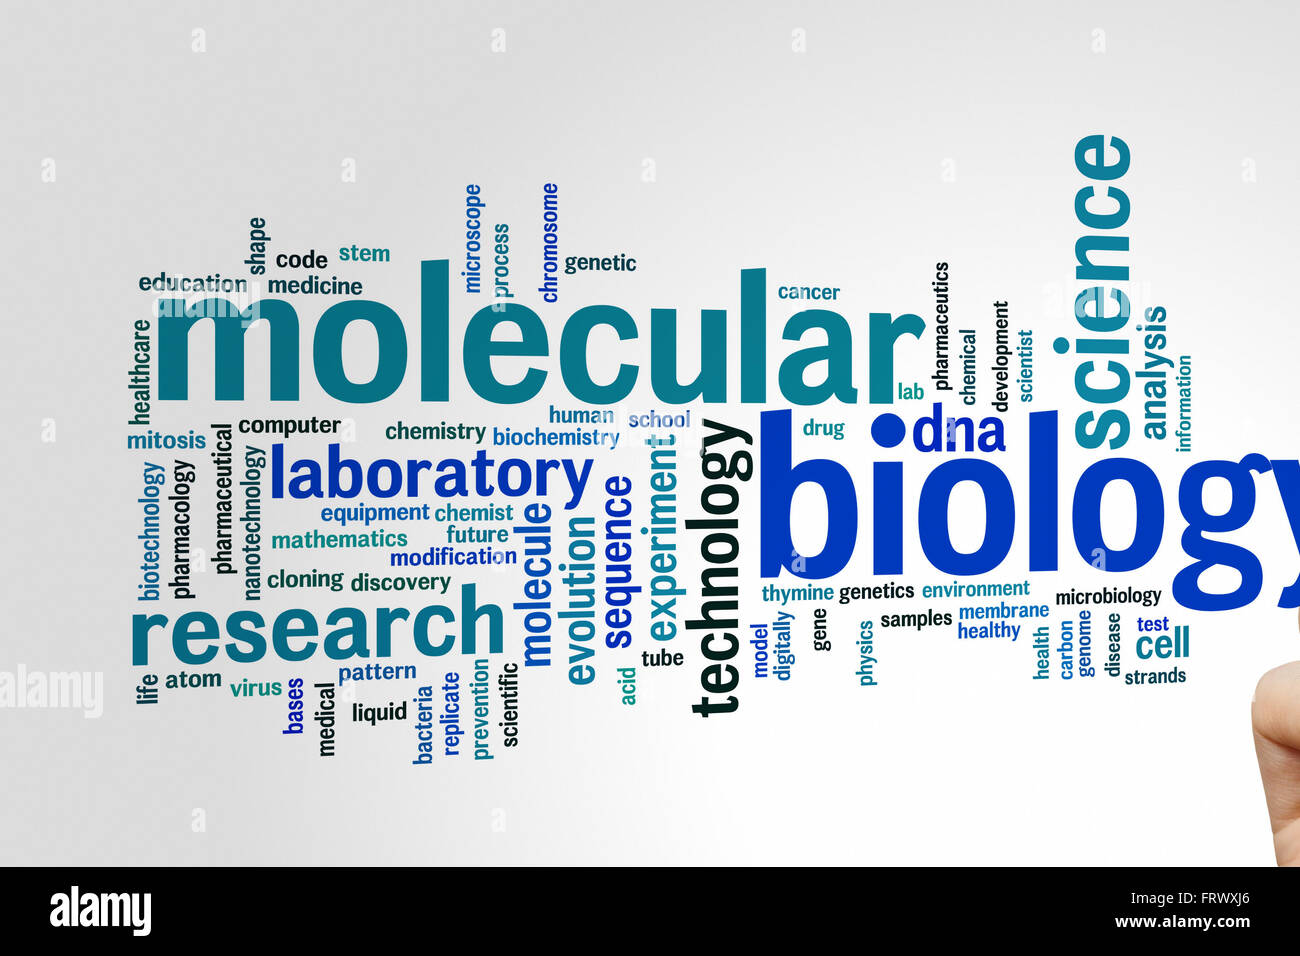 Molecular biology concept word cloud background Stock Photo